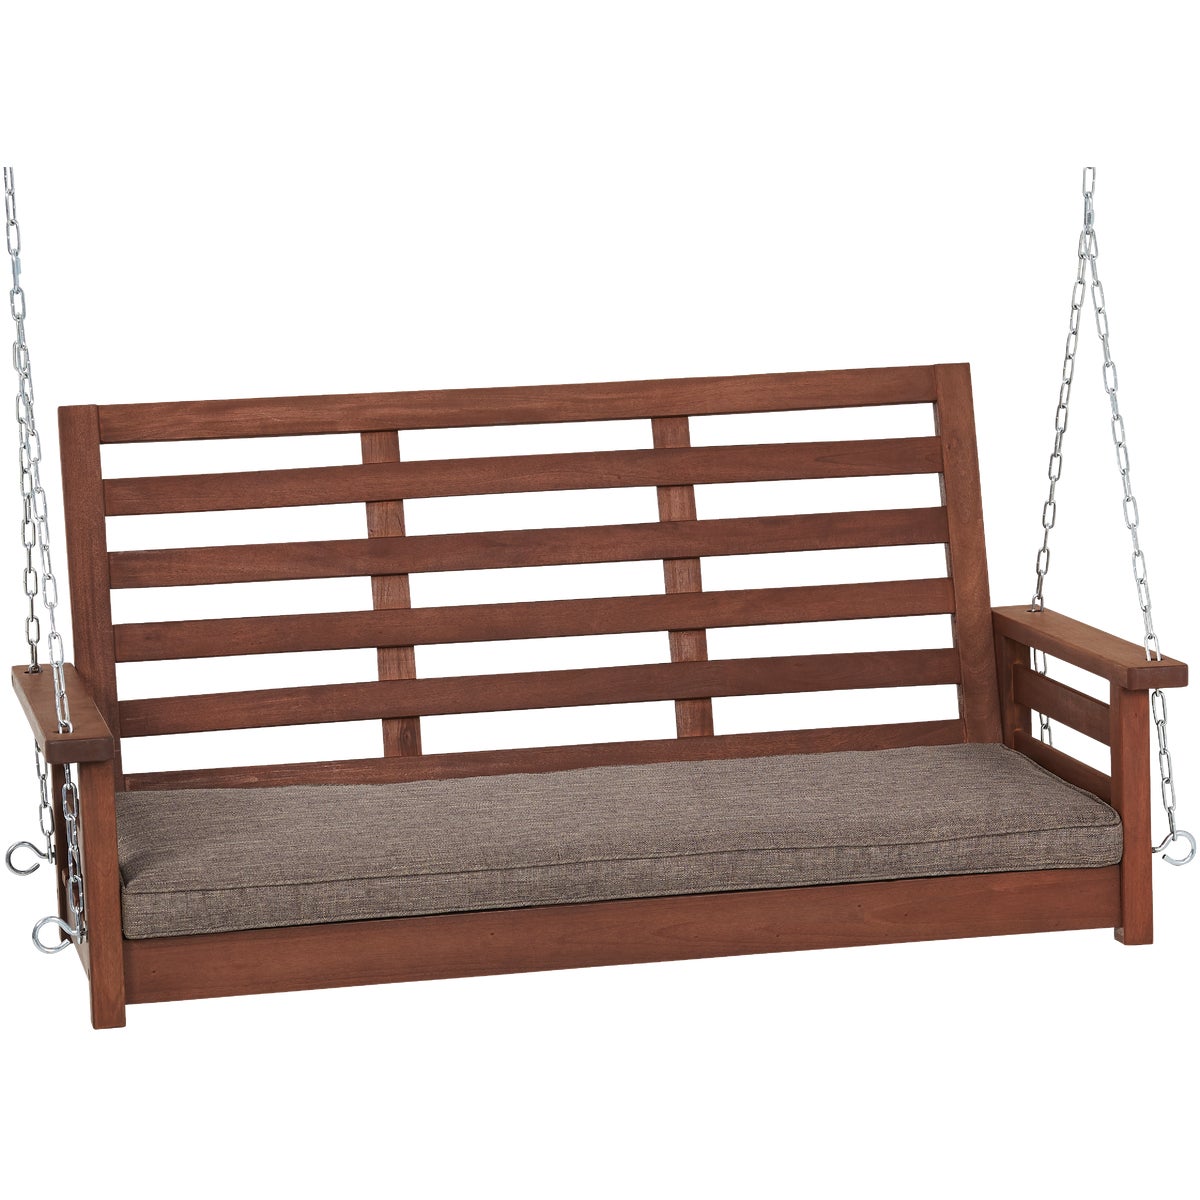 Jack Post 51 In. W. x 23.5 In. H. x 24 In. D. Indonesian Hardwood Porch Swing